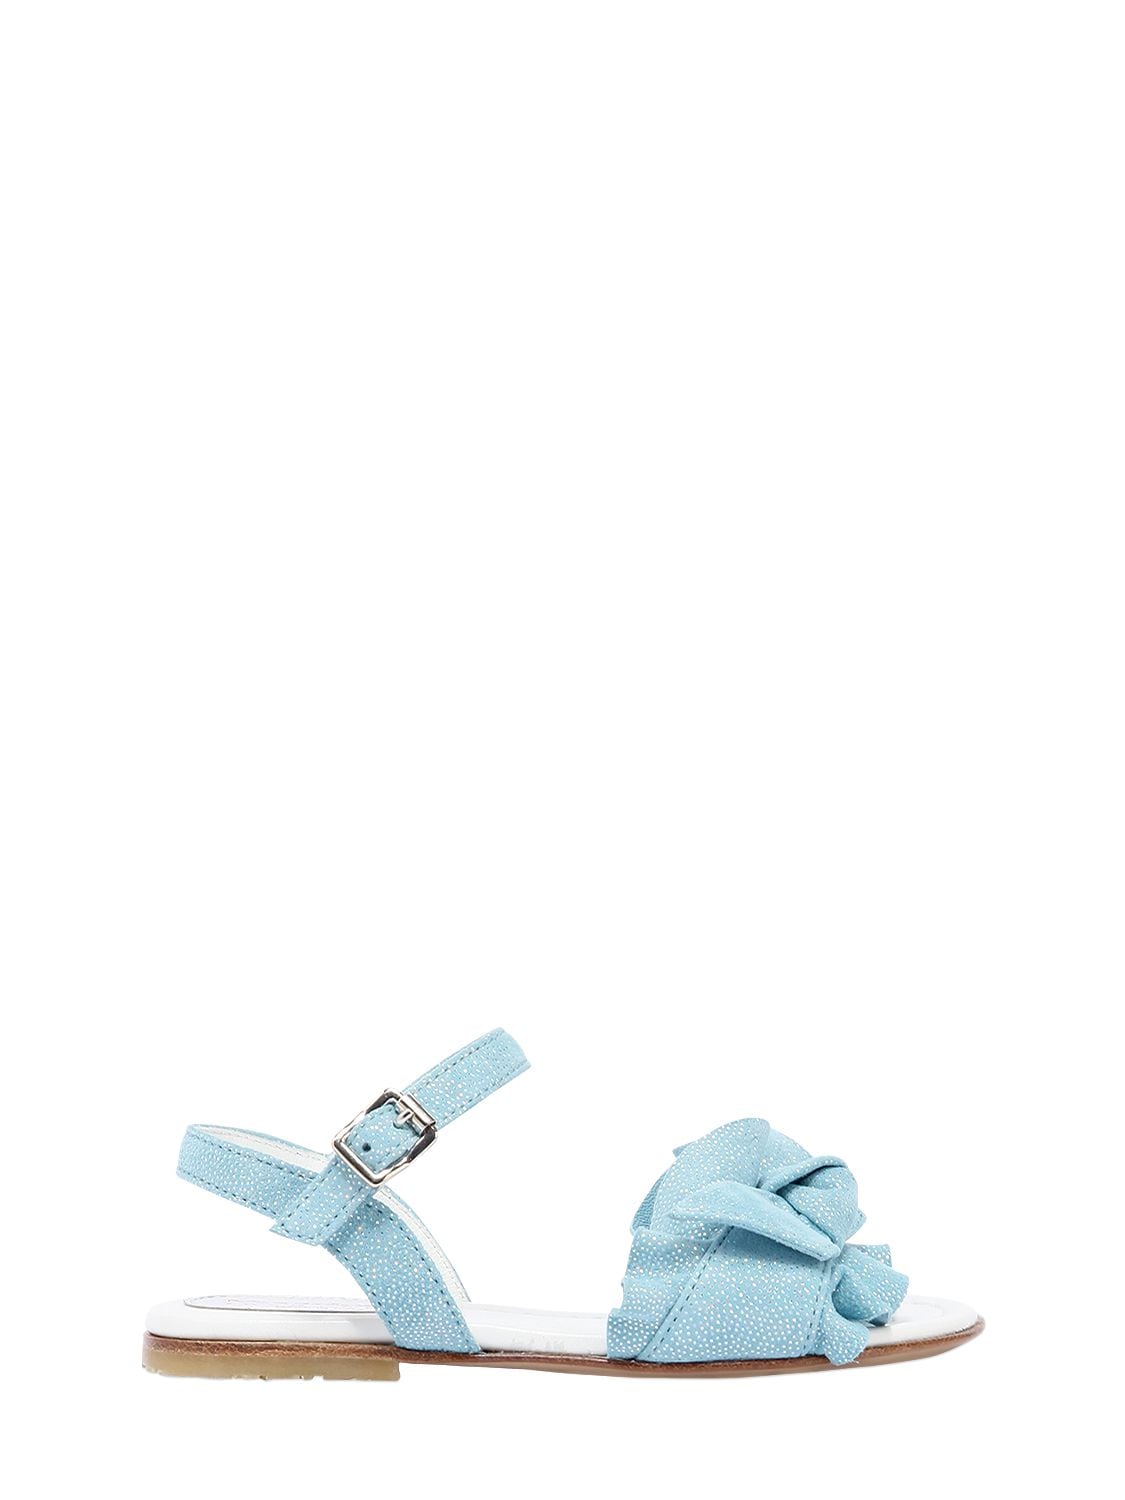 Andrea Montelpare Kids' Glittered Suede Sandals W/ Bow Detail In Light Blue